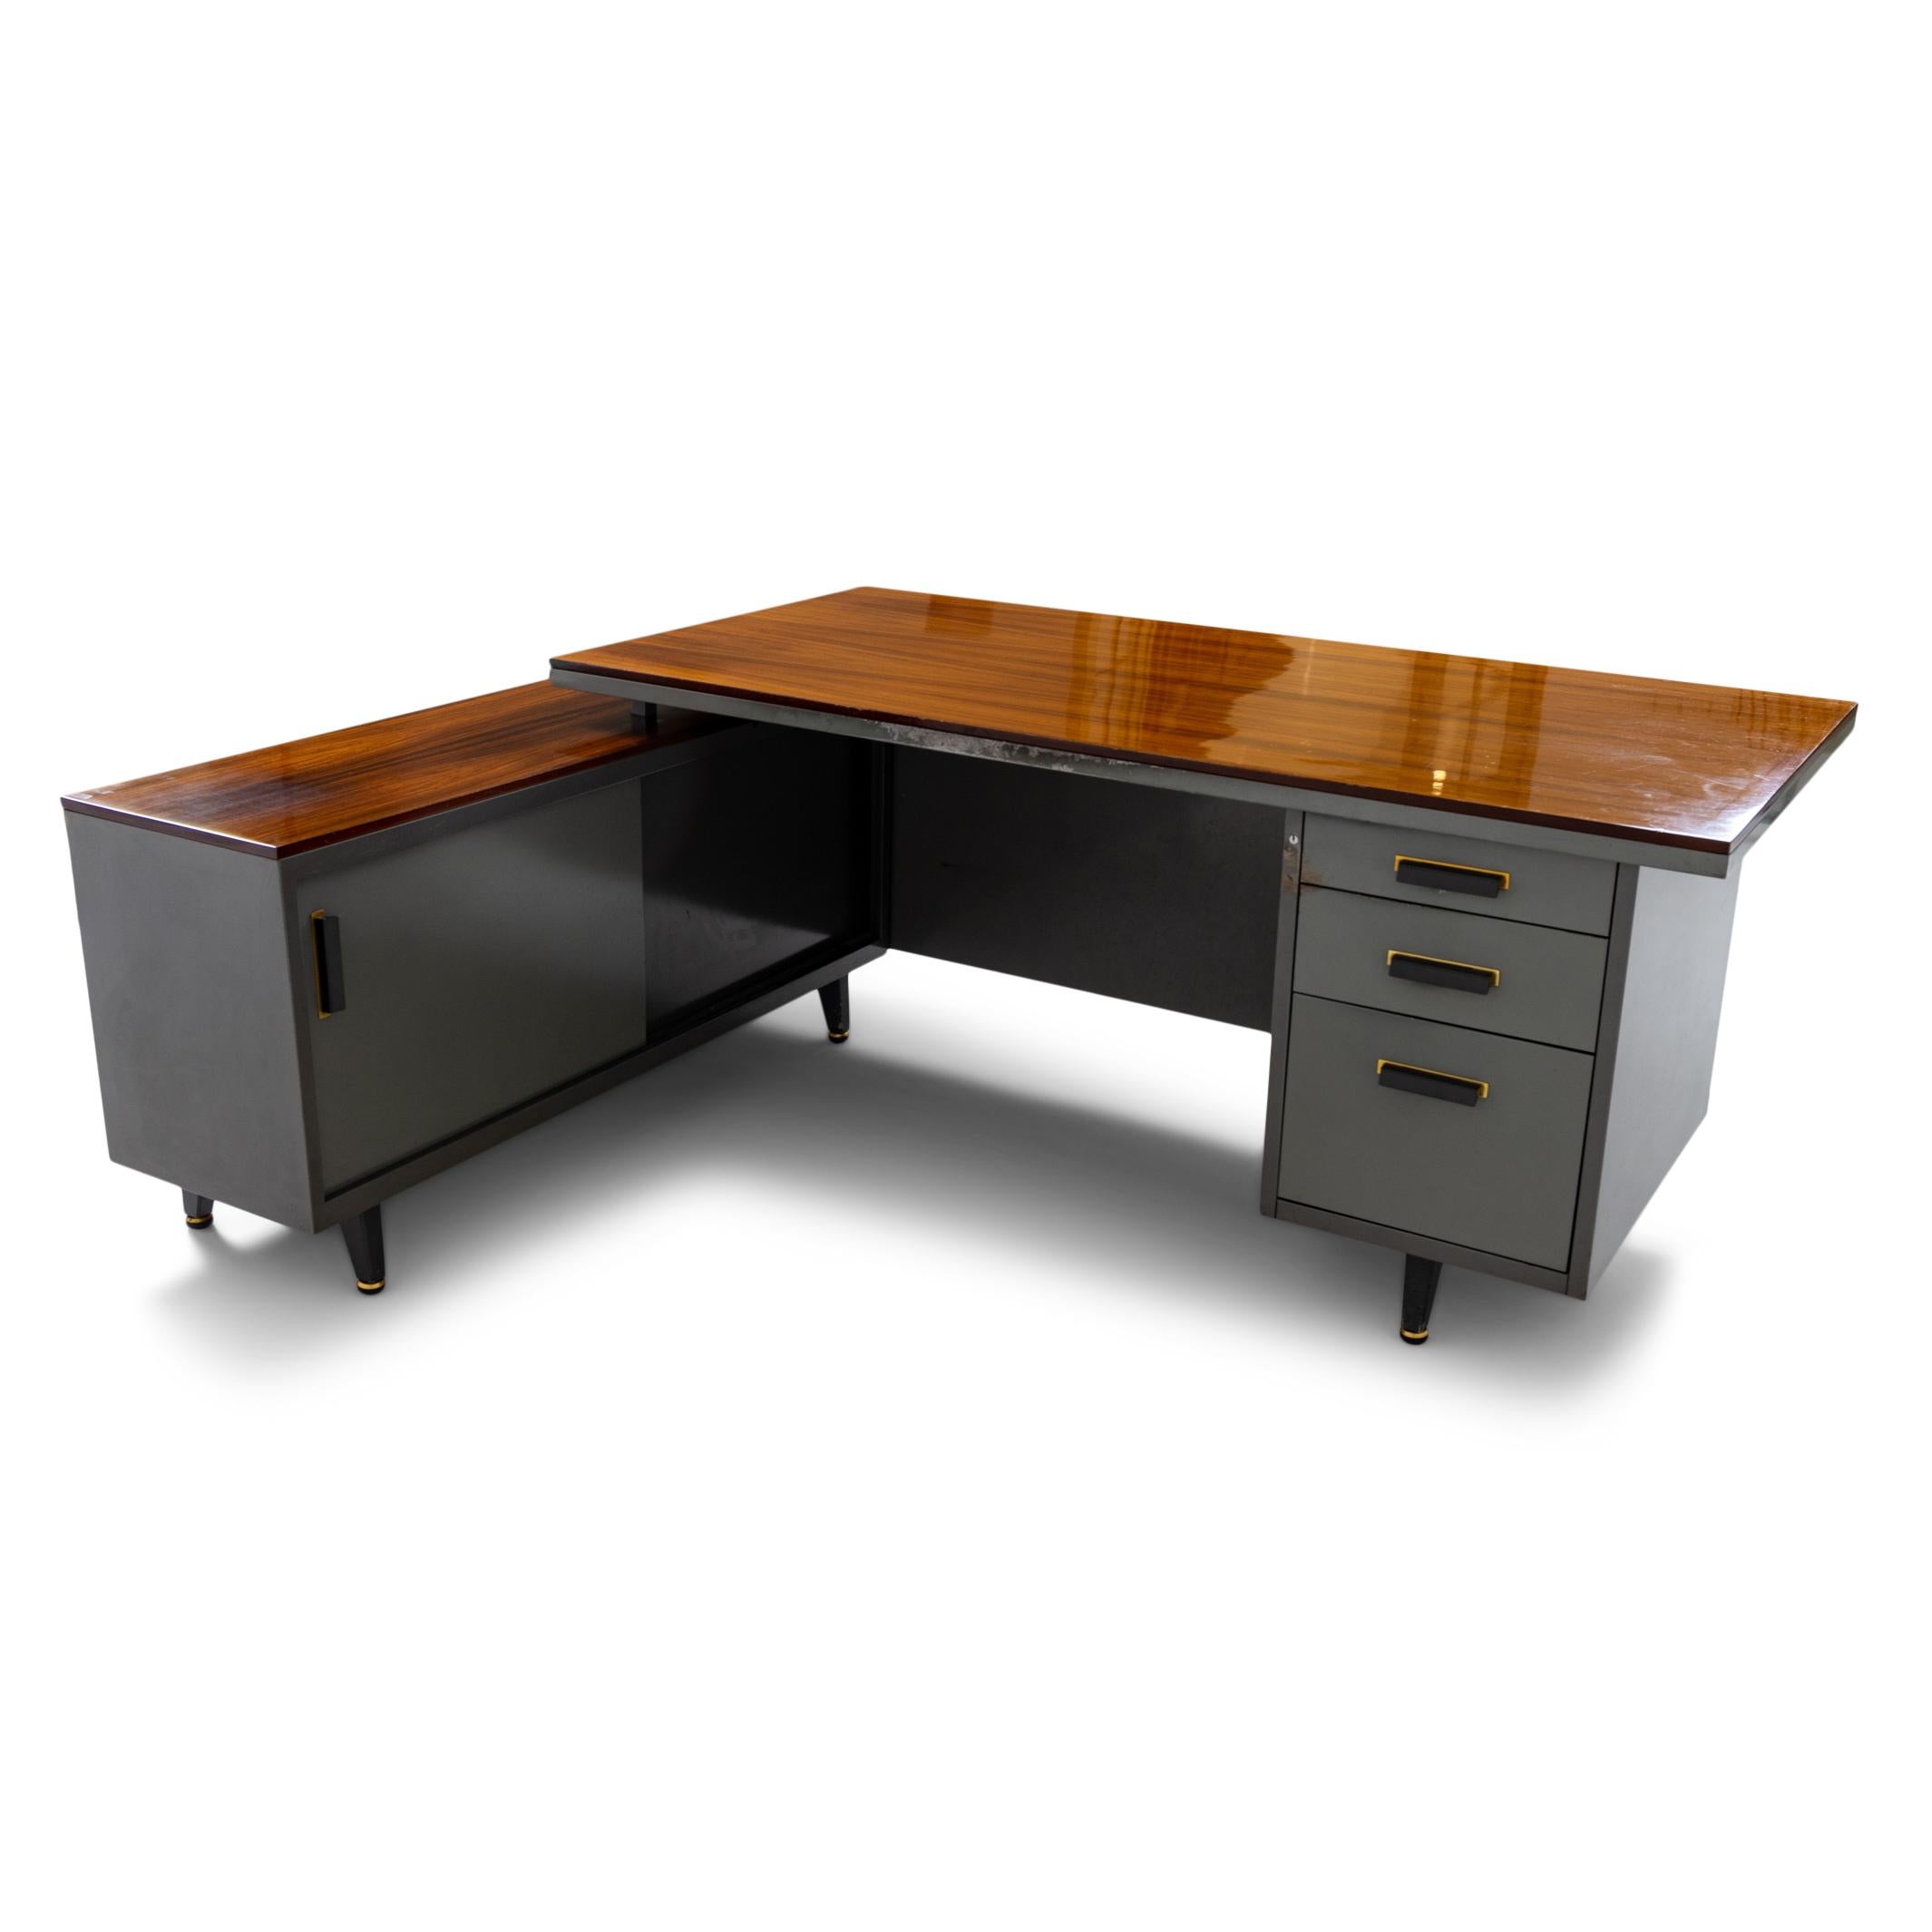 Large metal executive desk with side shelf and wooden relief by Nerone Ceccarelli and Giovanni Patuzzi.